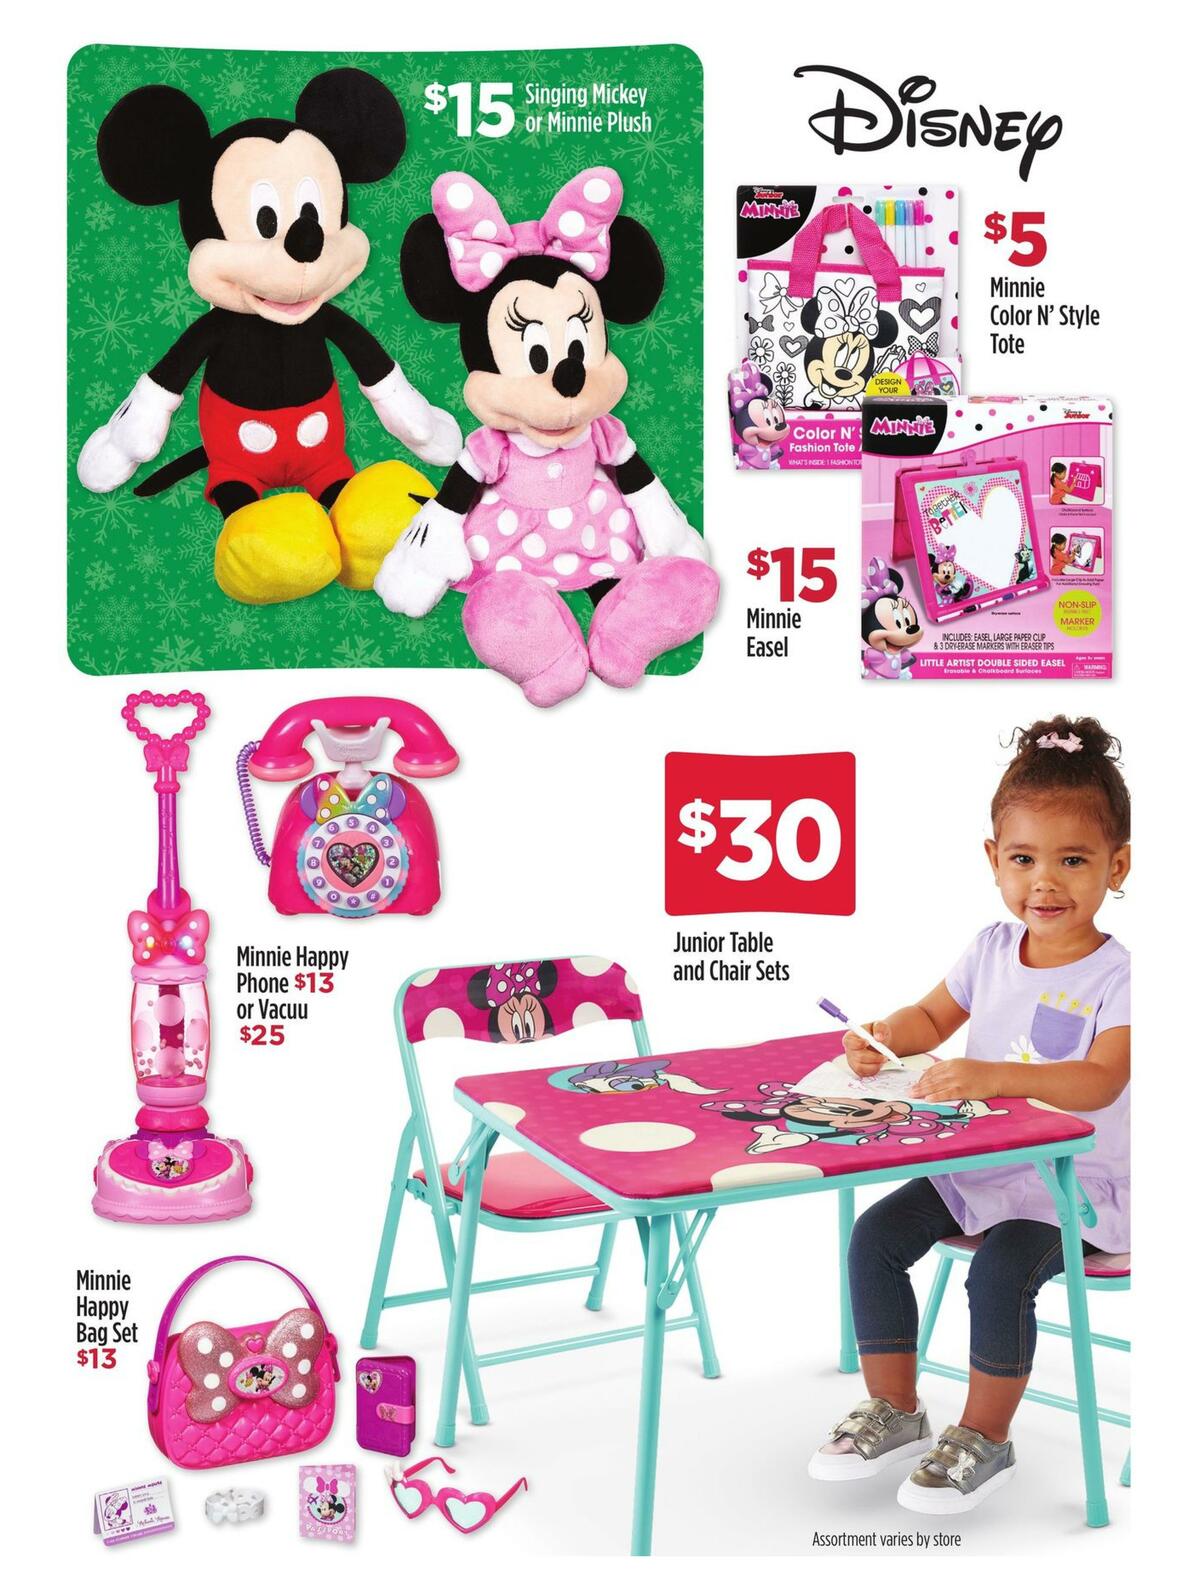 Dollar General Merry, Bright and Gifts so Right. Weekly Ad from October 22